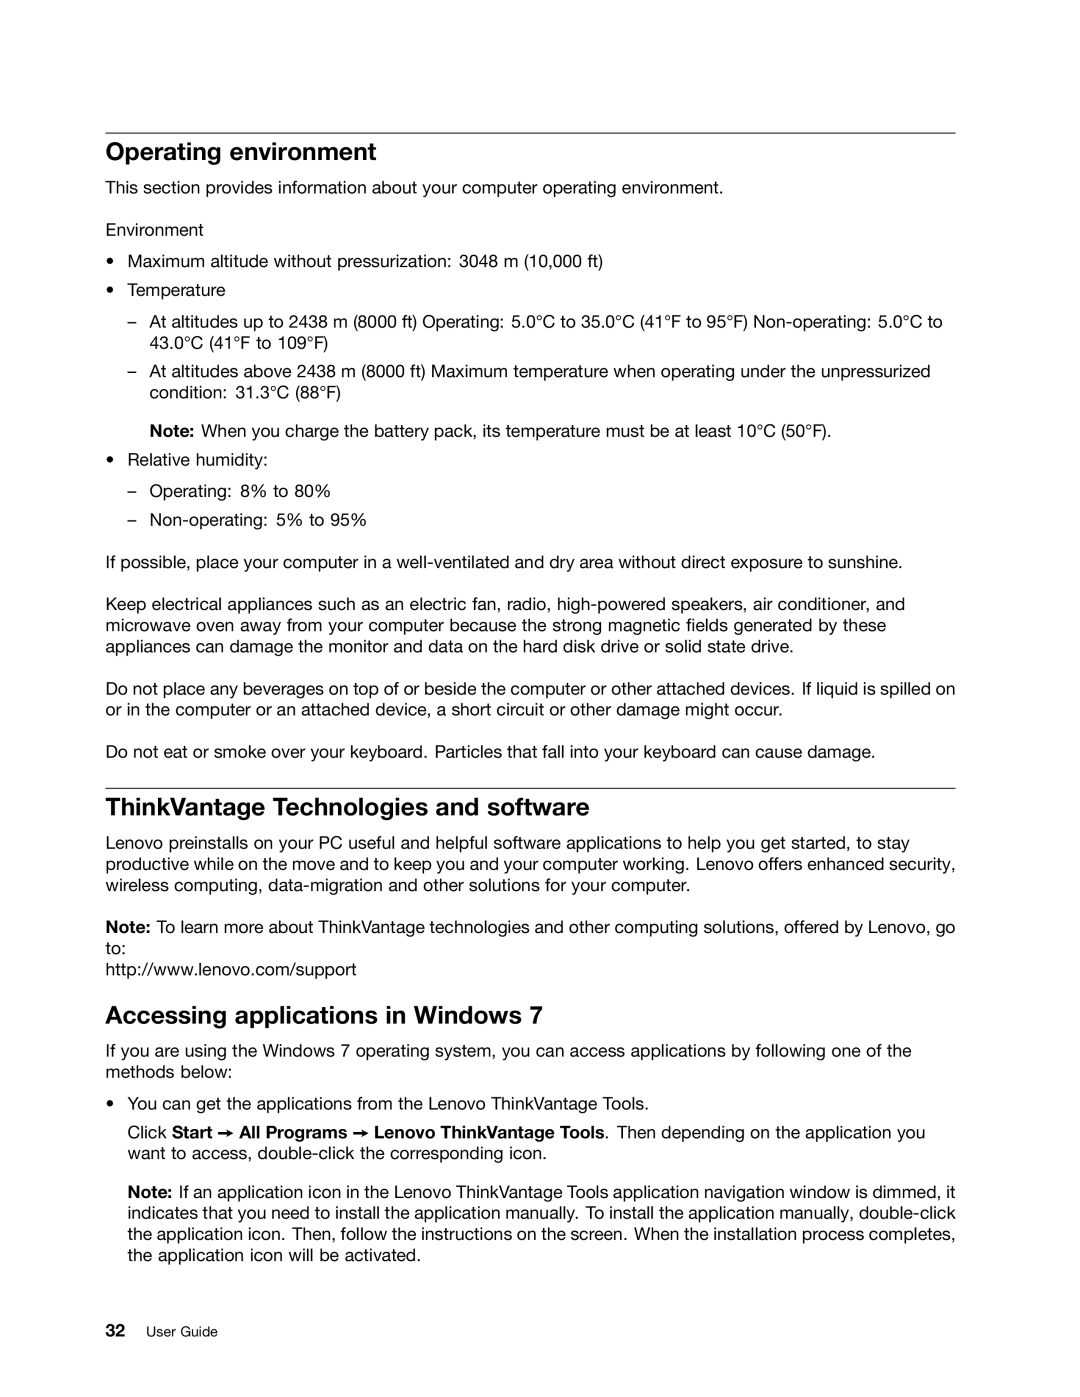 Lenovo 429040 manual Operating environment, ThinkVantage Technologies and software, Accessing applications in Windows 